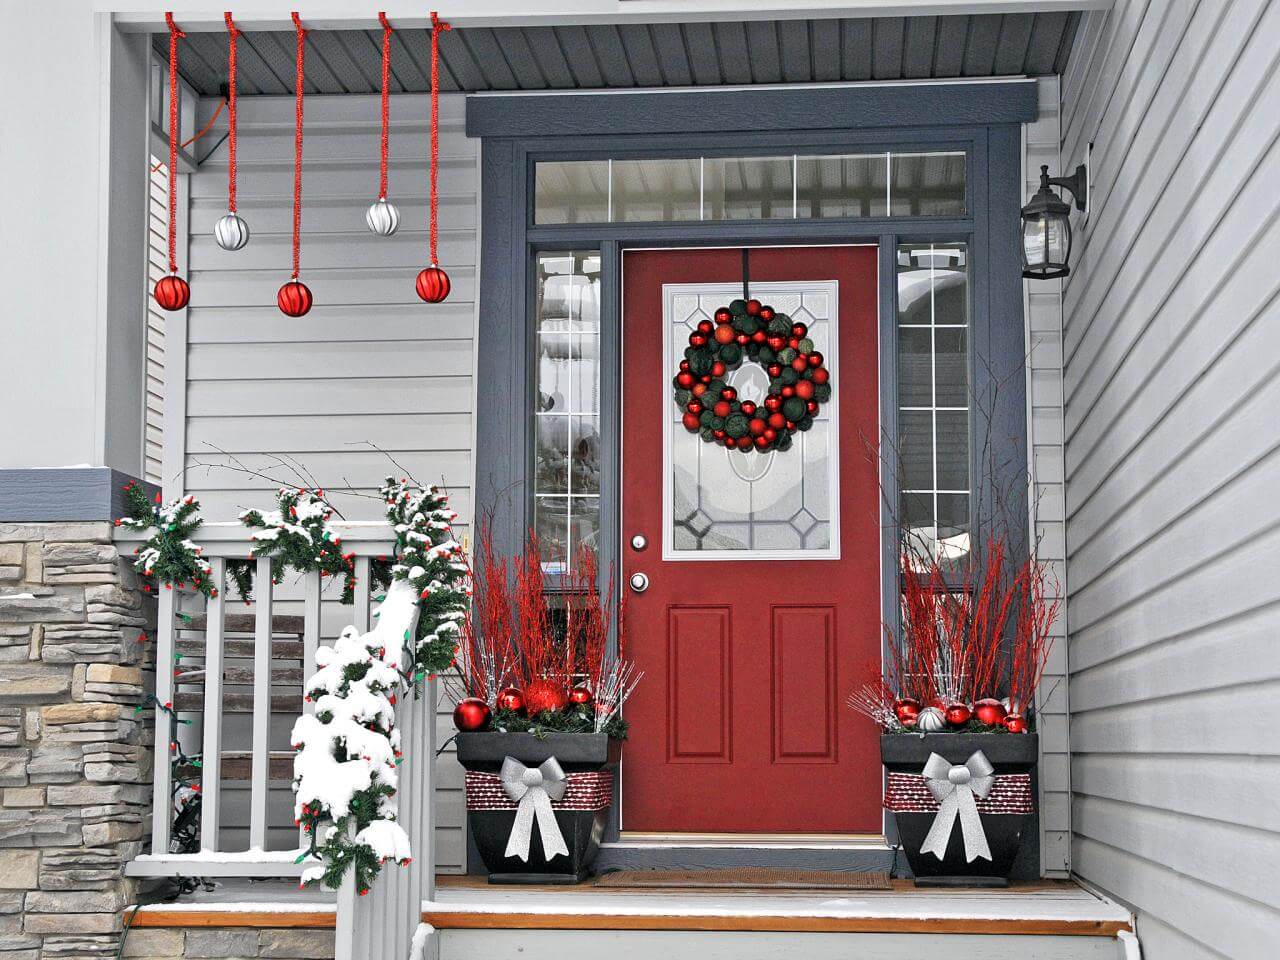 Beautify your front porch with 43 amazing winter decorating ideas - 307